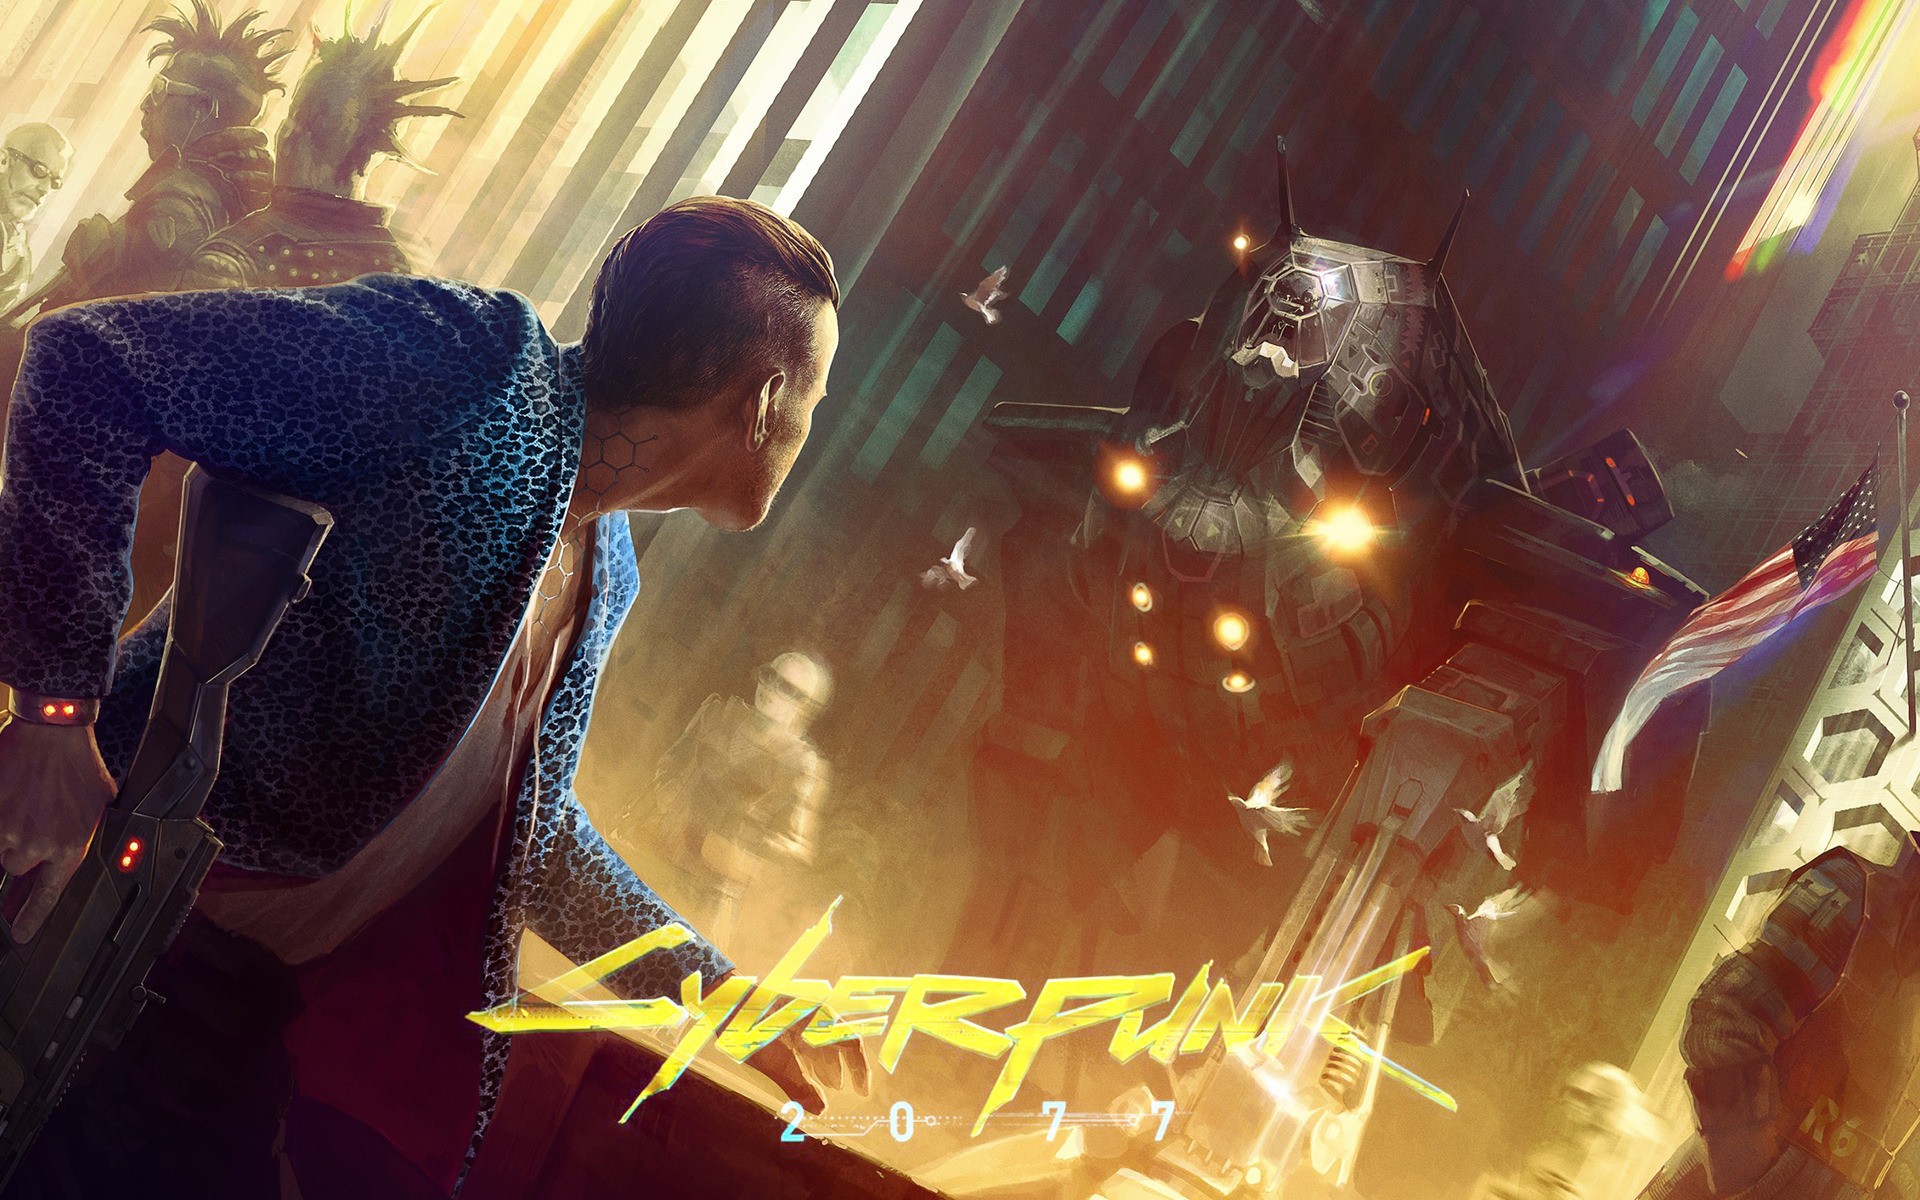 General 1920x1200 video games Cyberpunk 2077 artwork PC gaming video game art science fiction American flag flag weapon